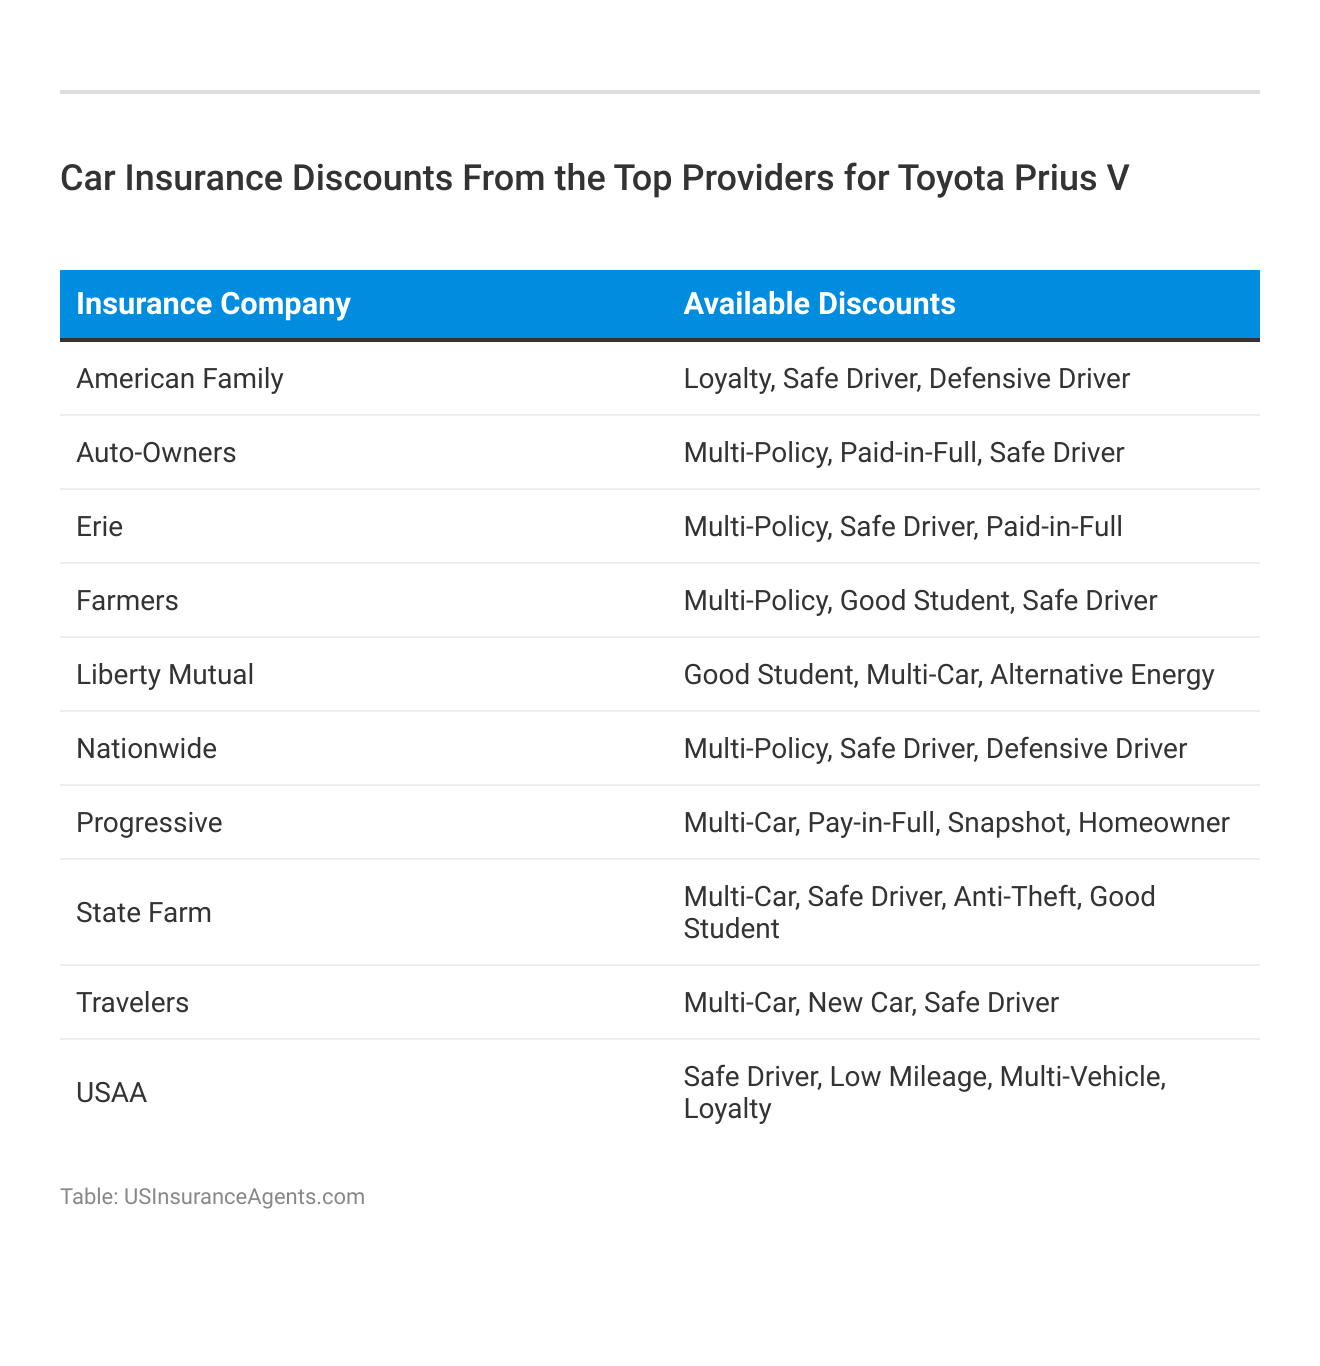 <h3>Car Insurance Discounts From the Top Providers for Toyota Prius V</h3>